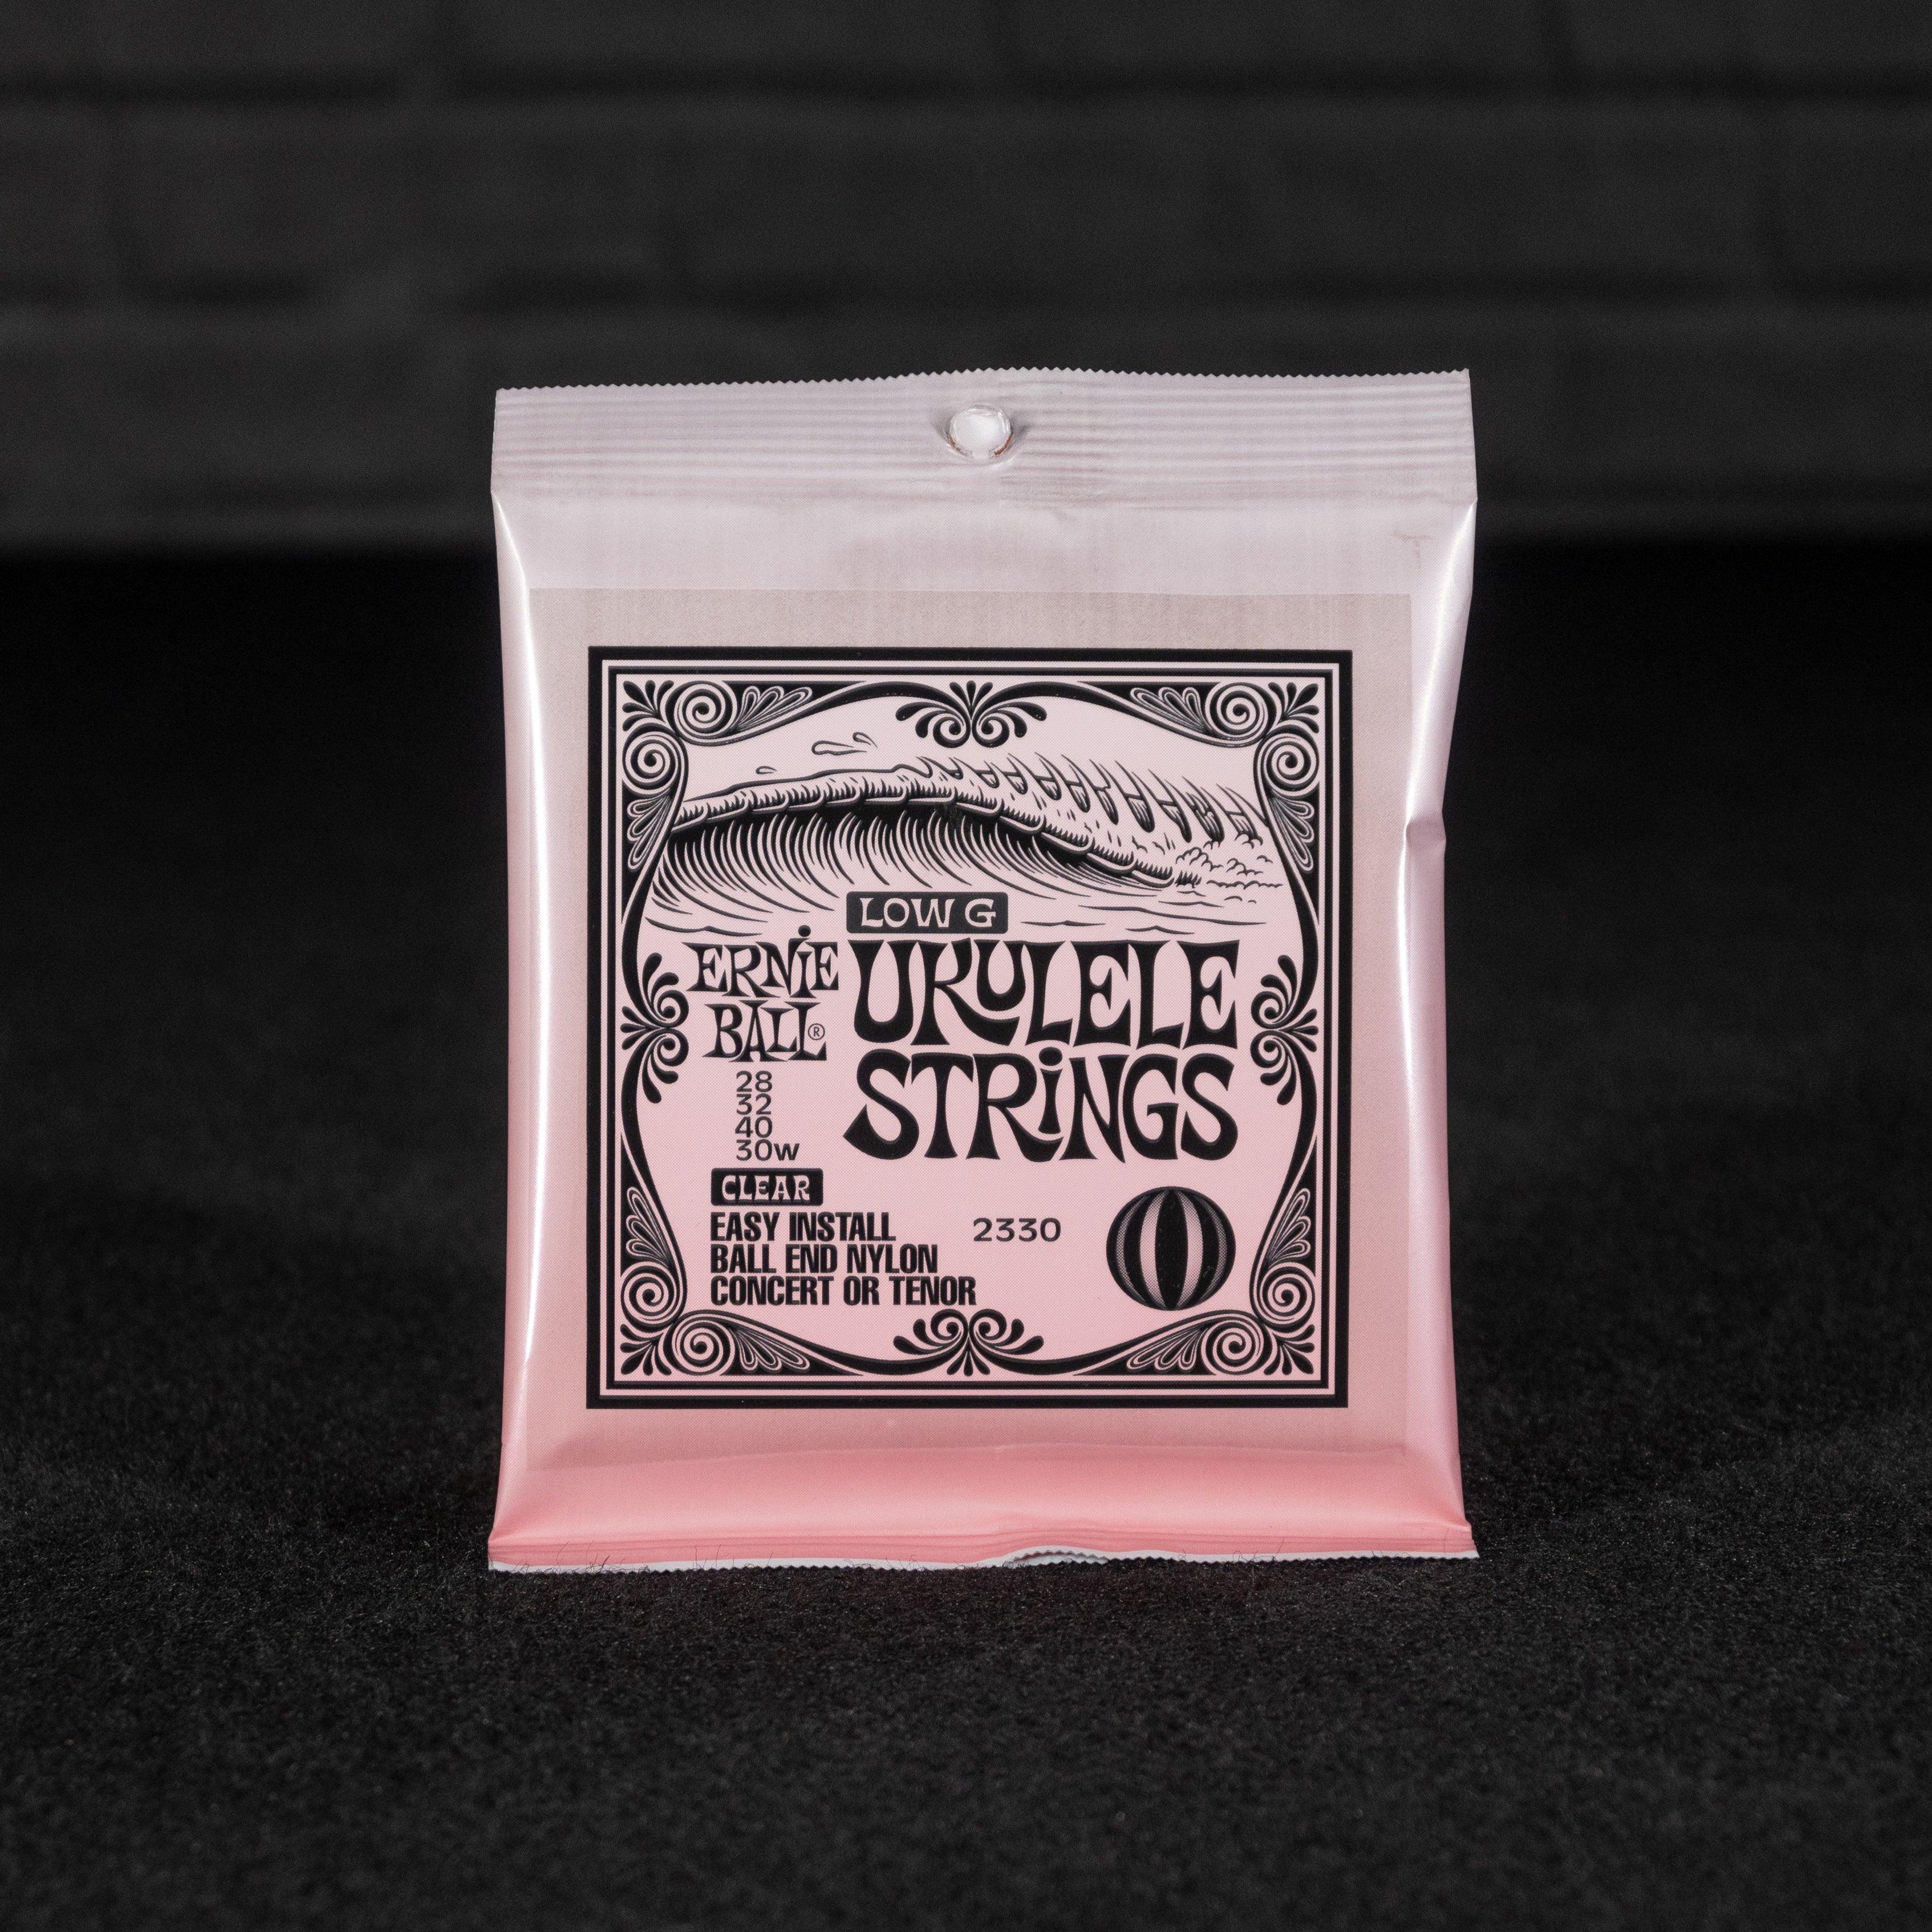 Ernie Ball Ukulele Ball End Nylon Strings Clear with Wound G - Impulse Music Co.